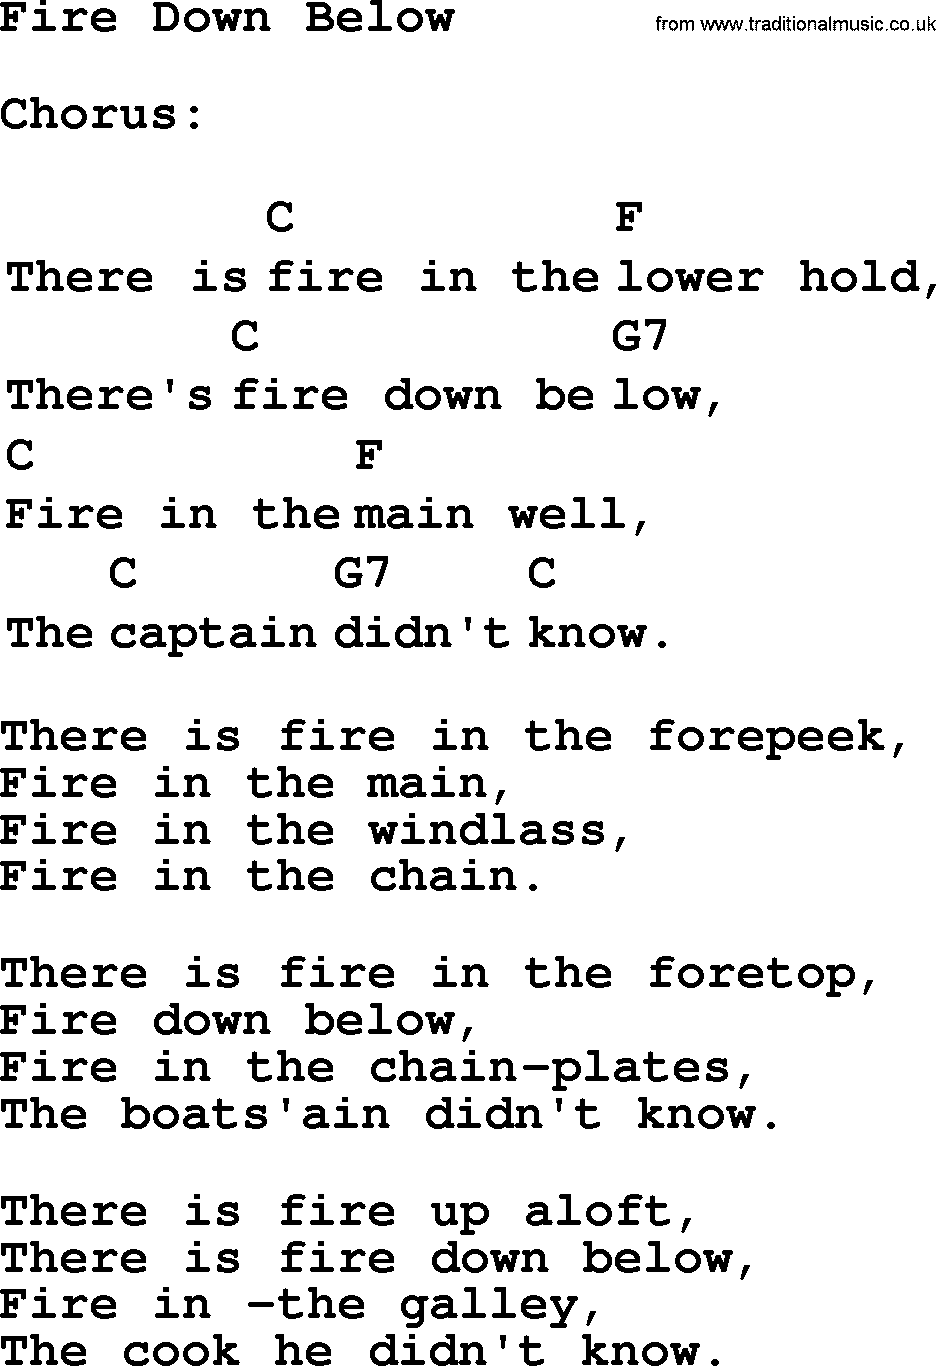 Top 1000 Most Popular Folk and Old-time Songs: Fire Down Below, lyrics and chords